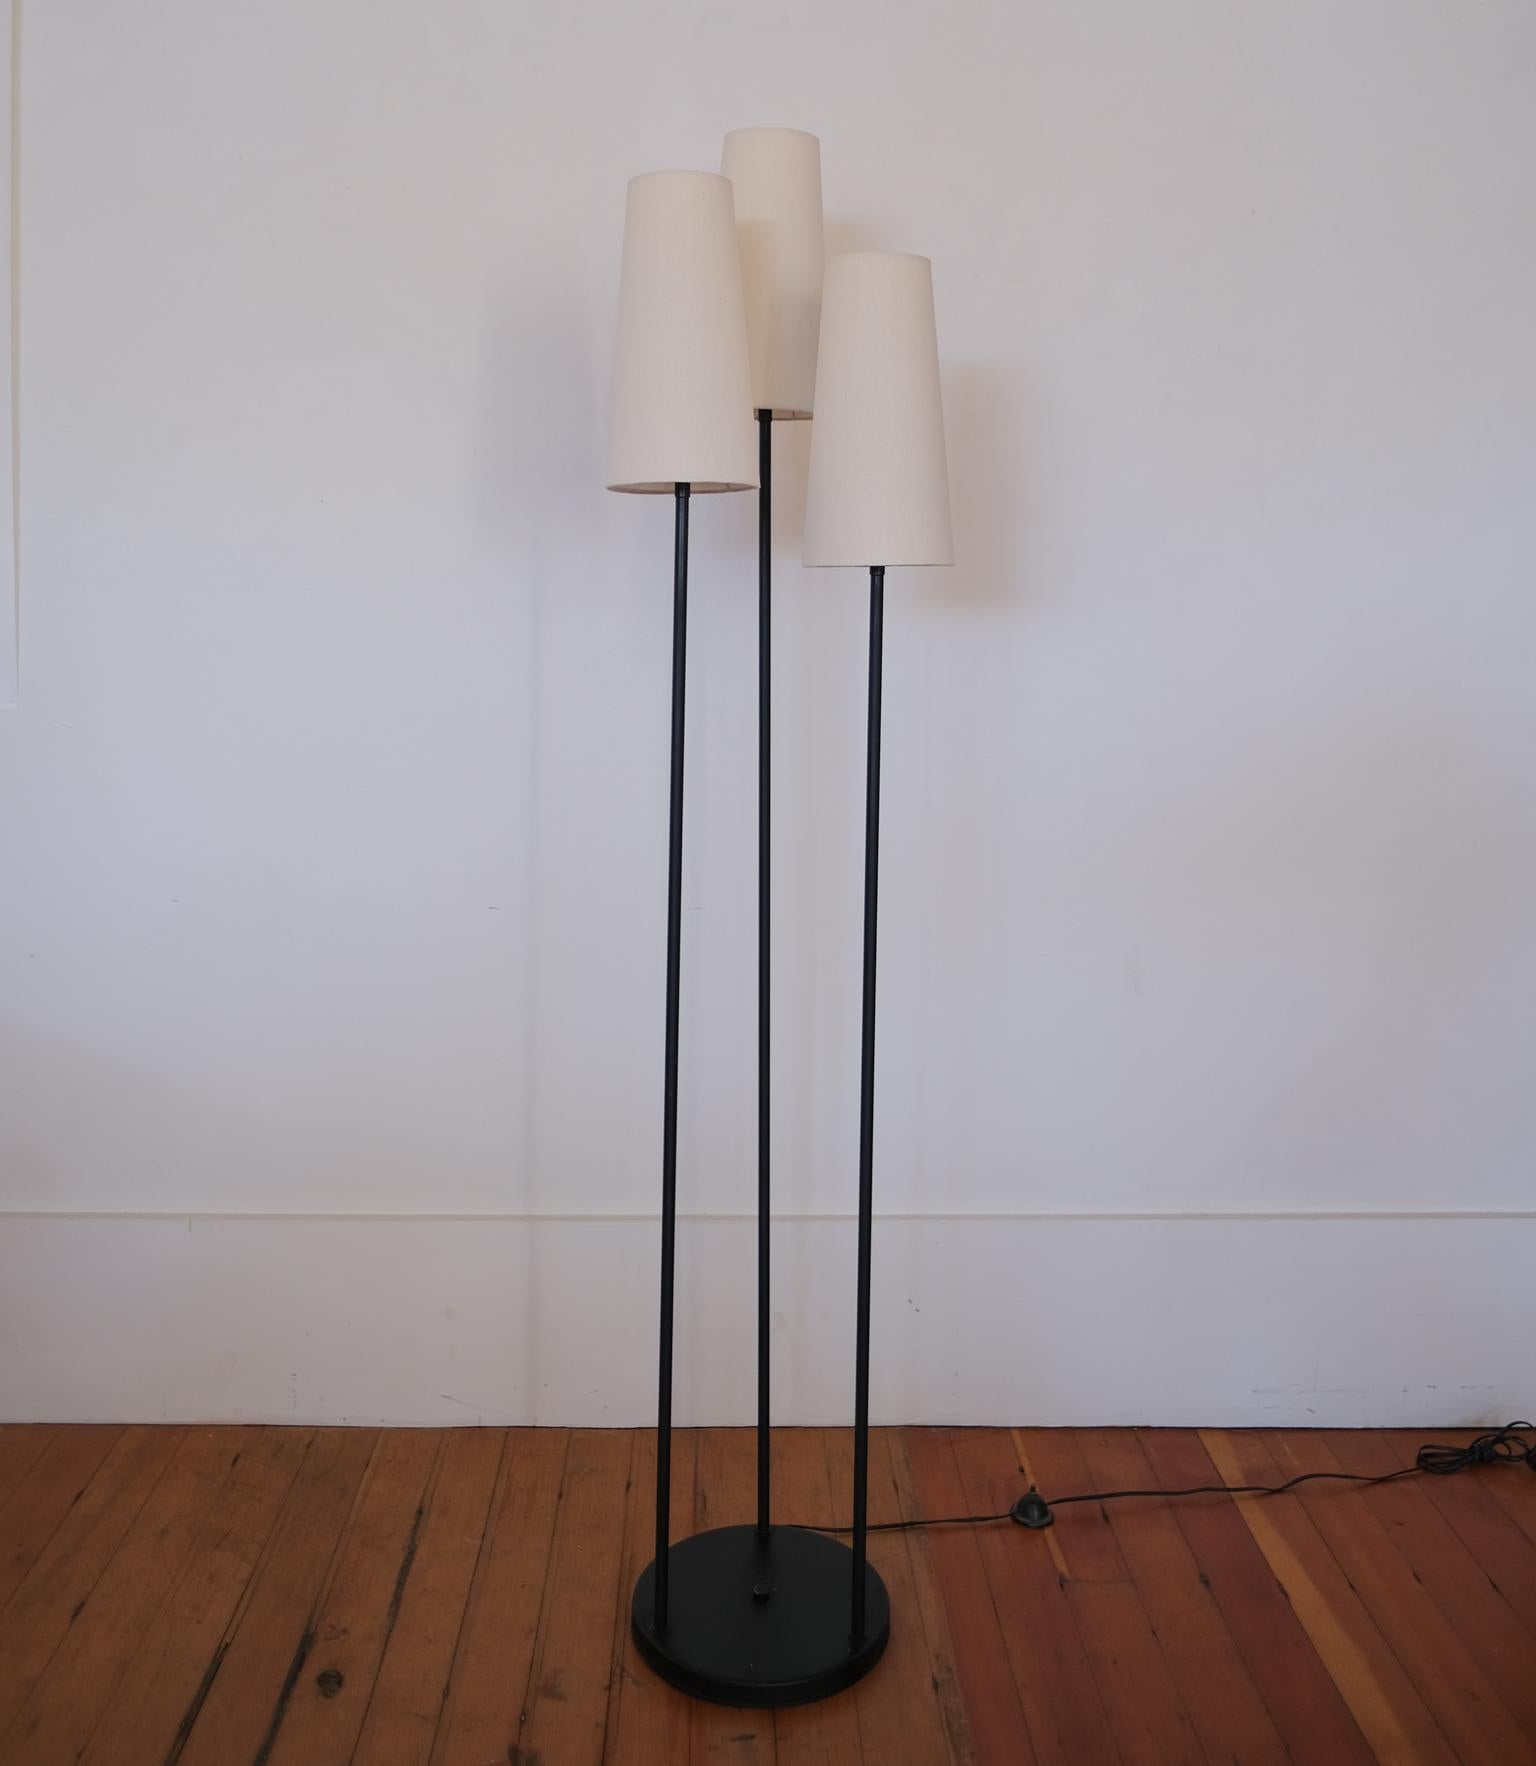 David Wurster three bulb floor lamp. Distributed by Raymor in the early 1950s. New linen shades on original frames. Black enamel finish is original, 1950s.

Wurster was a prolific east coast designer who had numerous items included in MoMA's Good